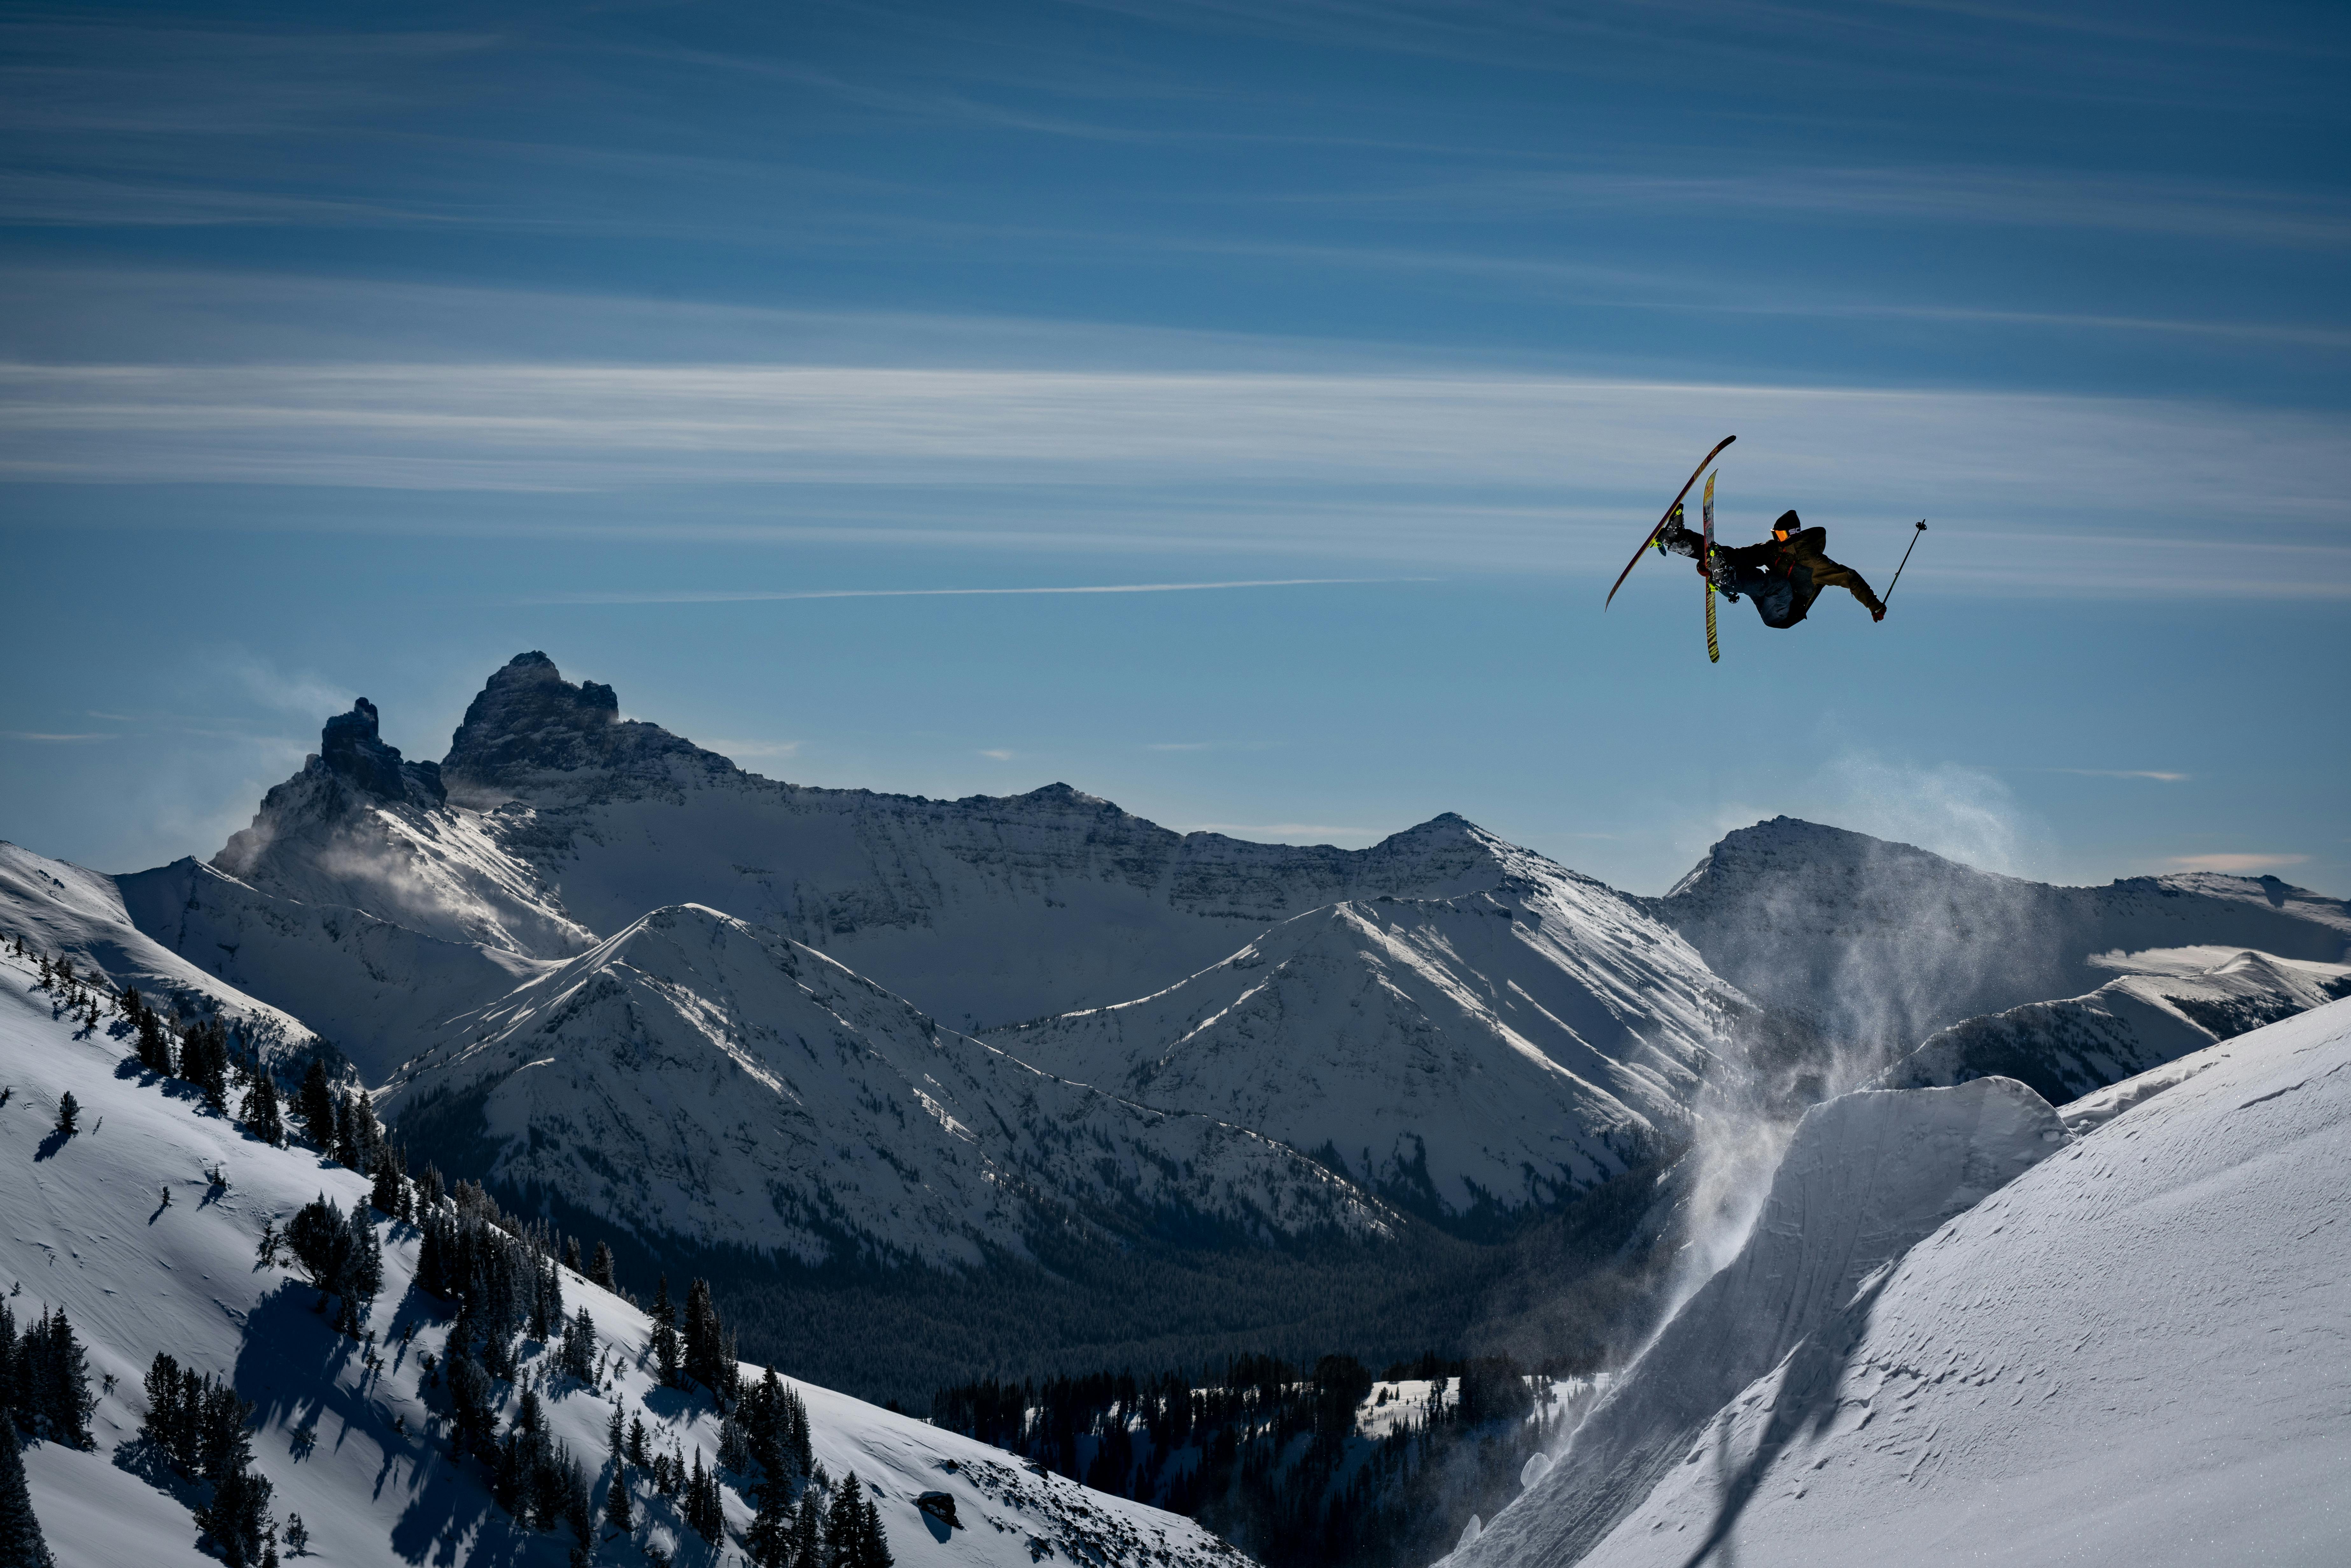 McRae Williams jumps while skiing. 